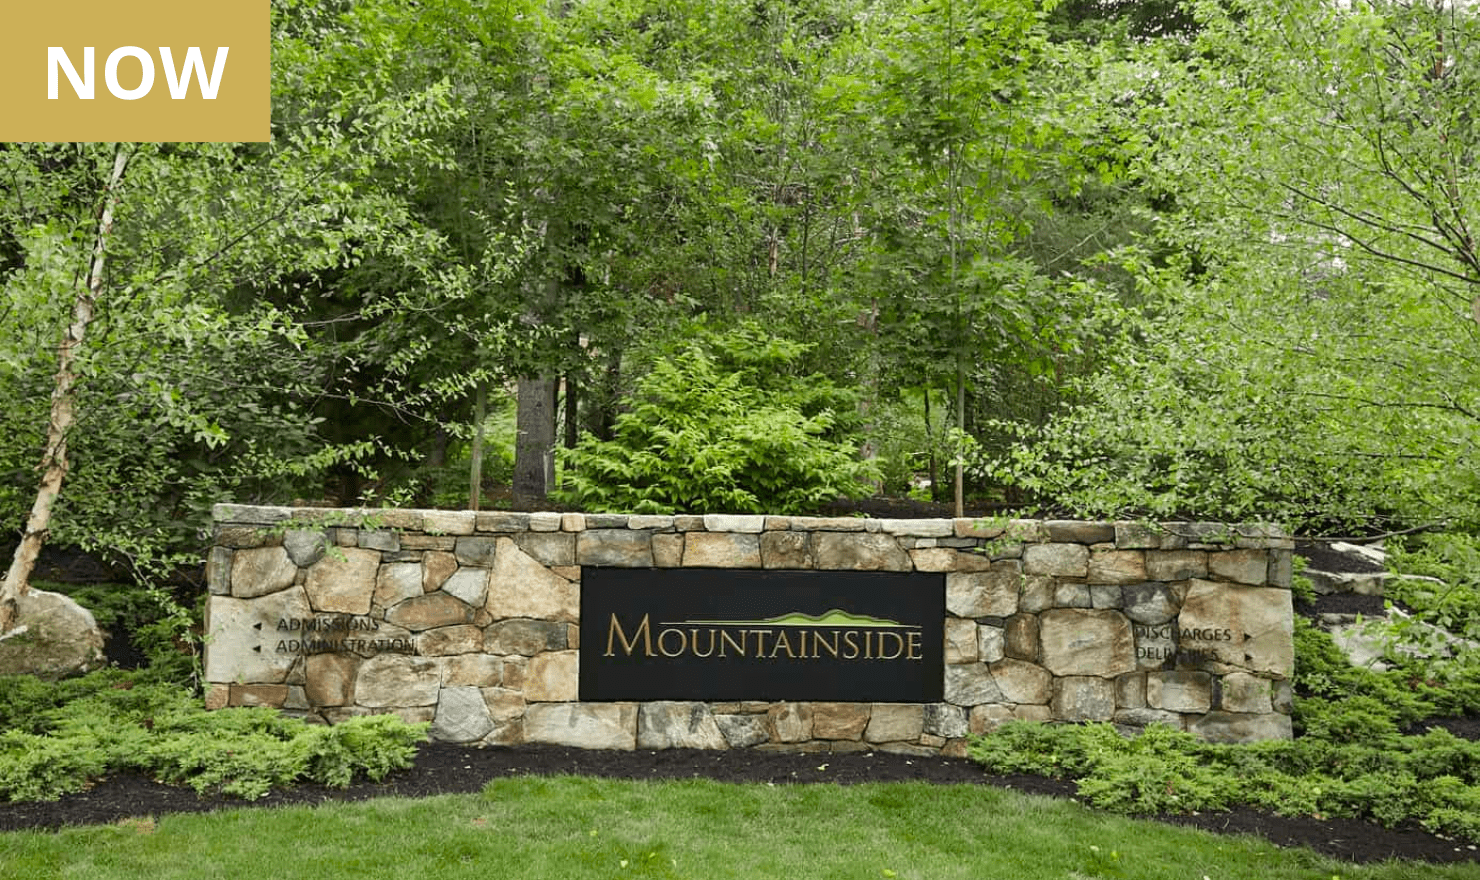 NOW: Mountainside Sign